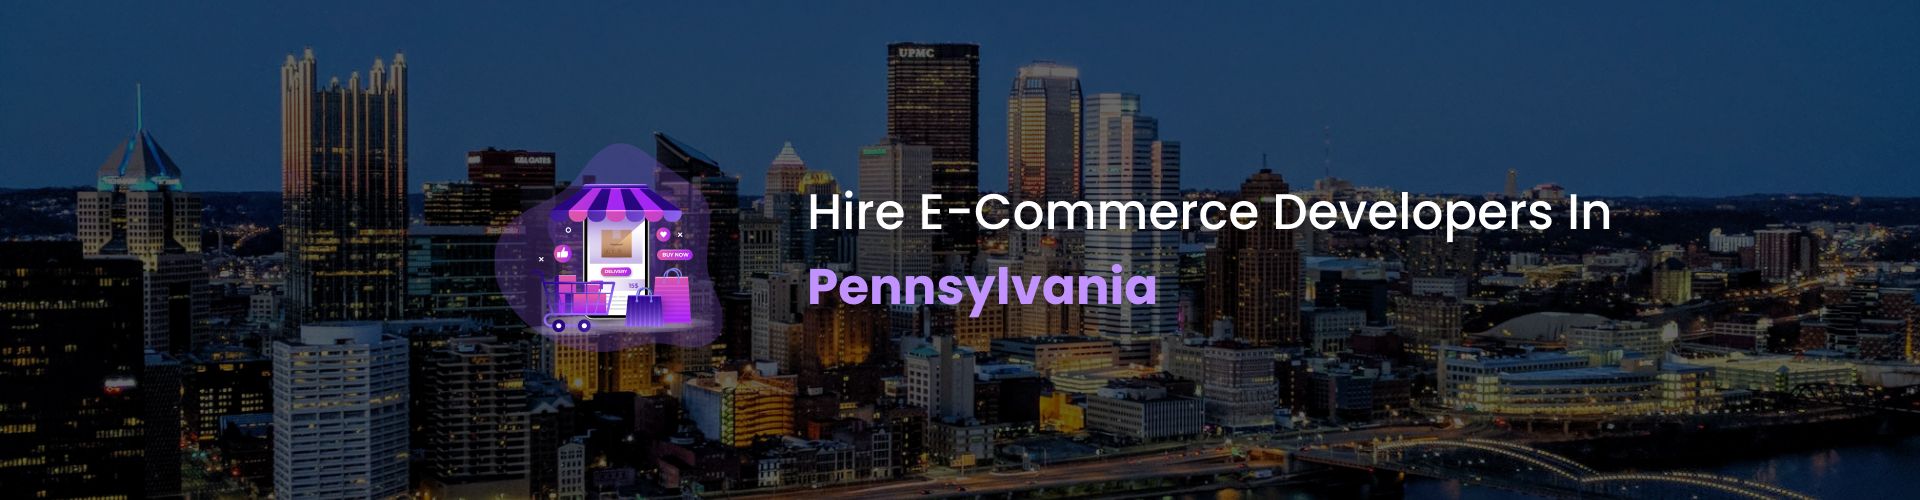 hire ecommerce developers in pennsylvania